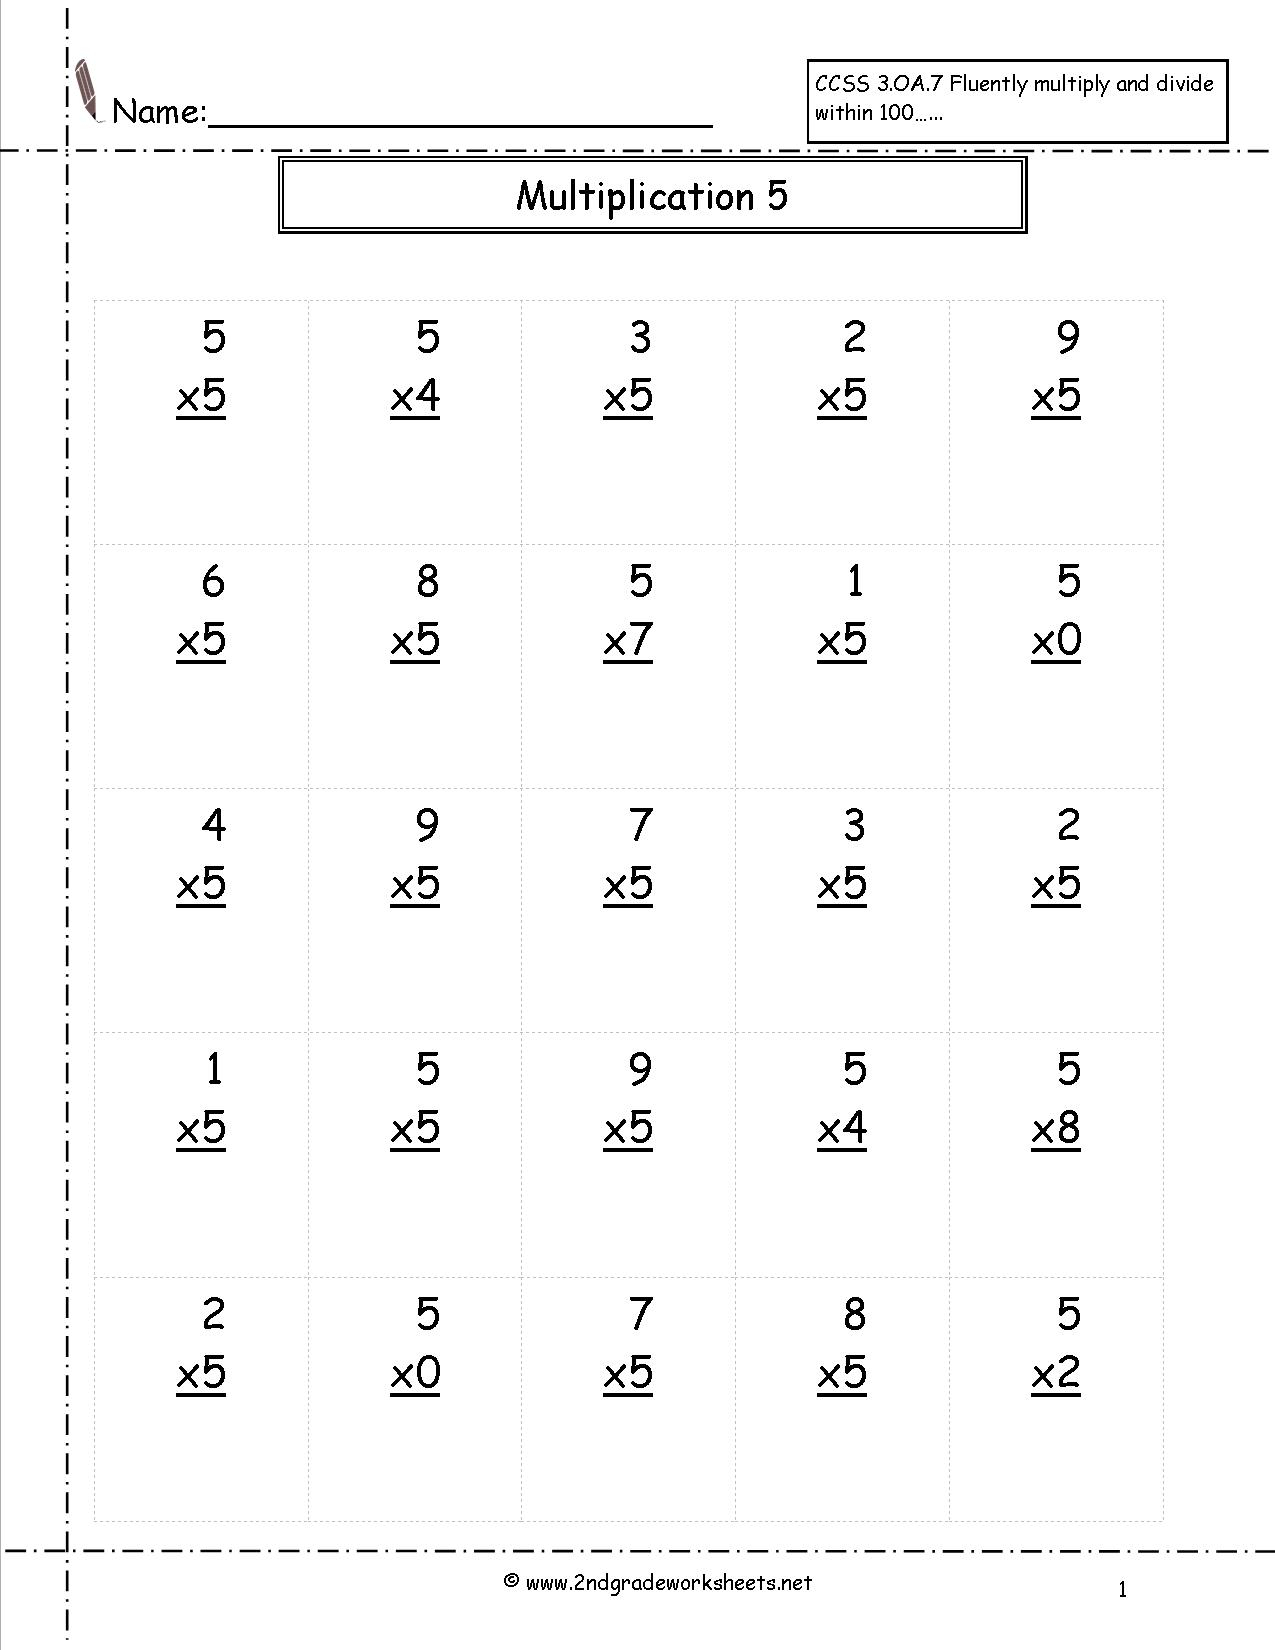 Multiplication Worksheets And Printouts regarding Multiplication Worksheets Doc